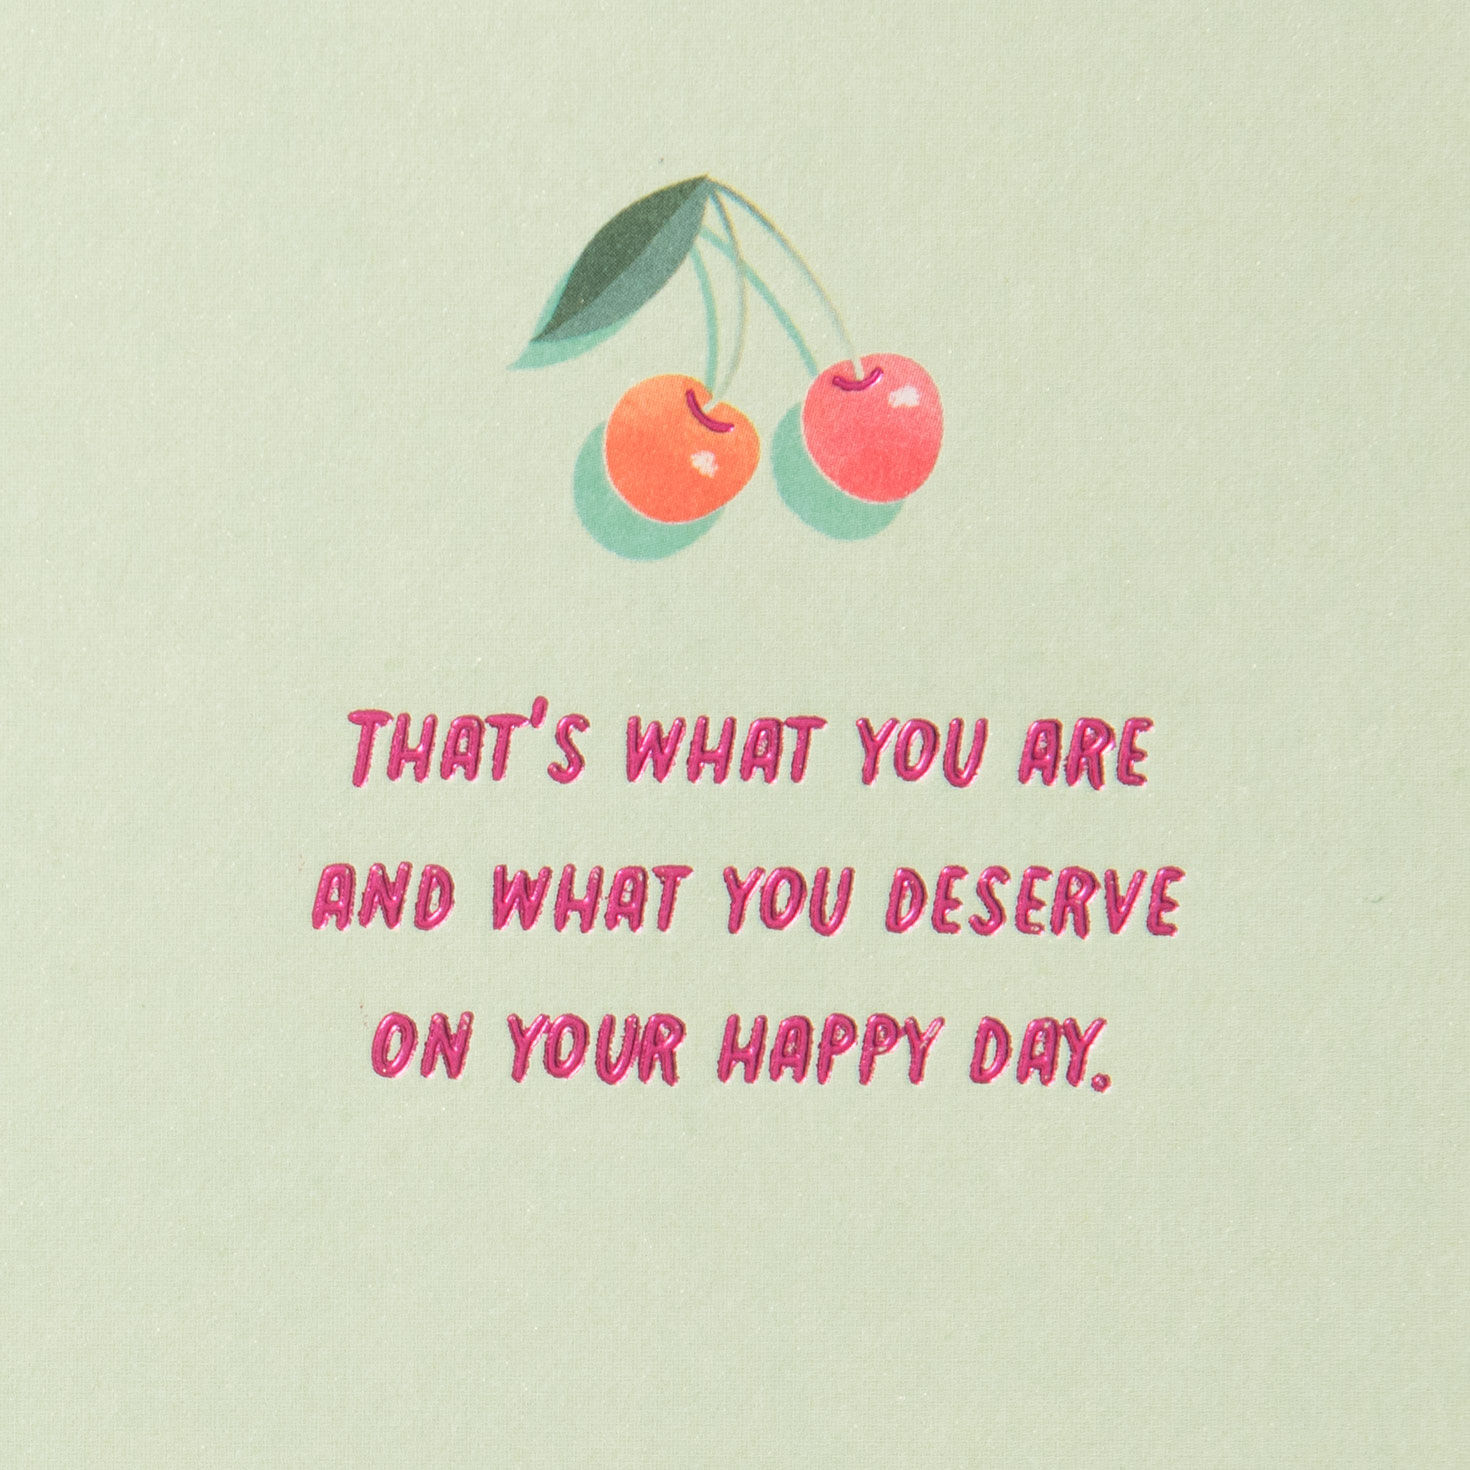 Pure Sweetness, Joy and Love Birthday Card for only USD 5.59 | Hallmark